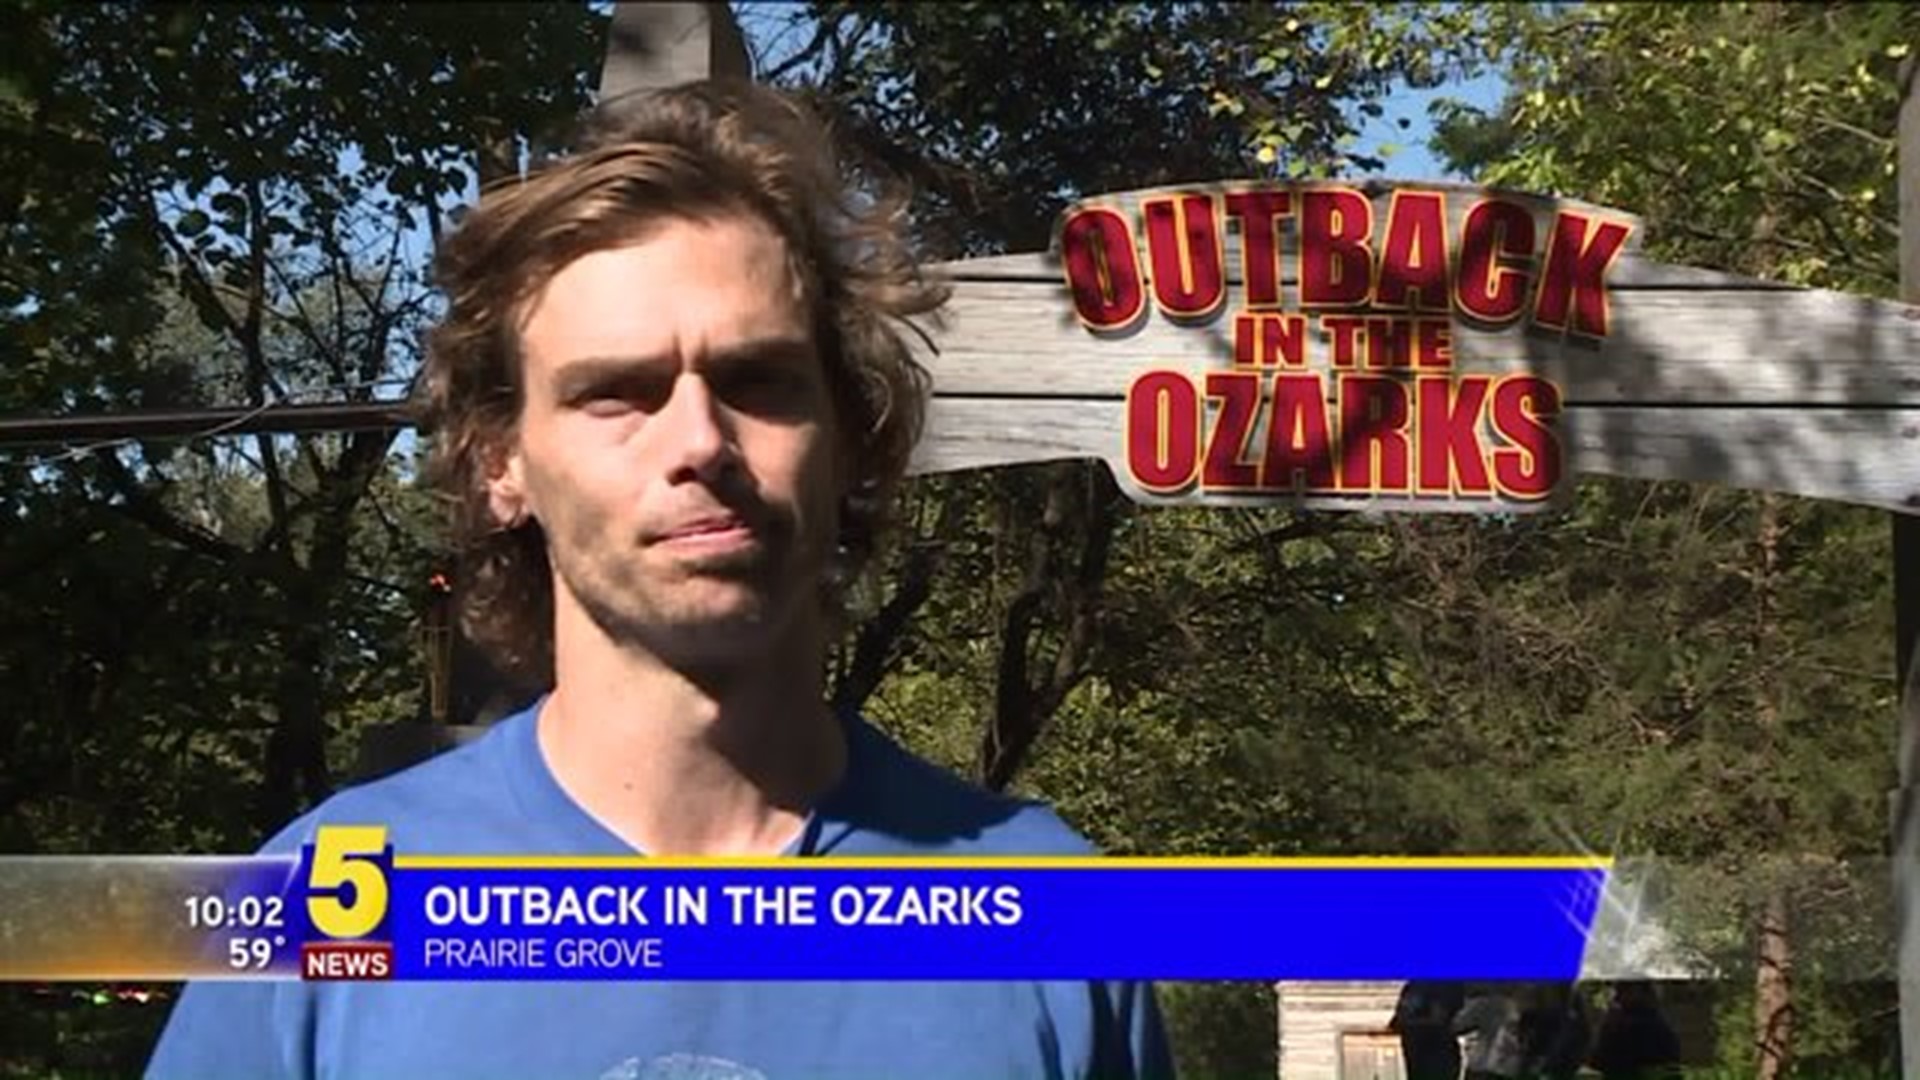 Outback in the Ozarks